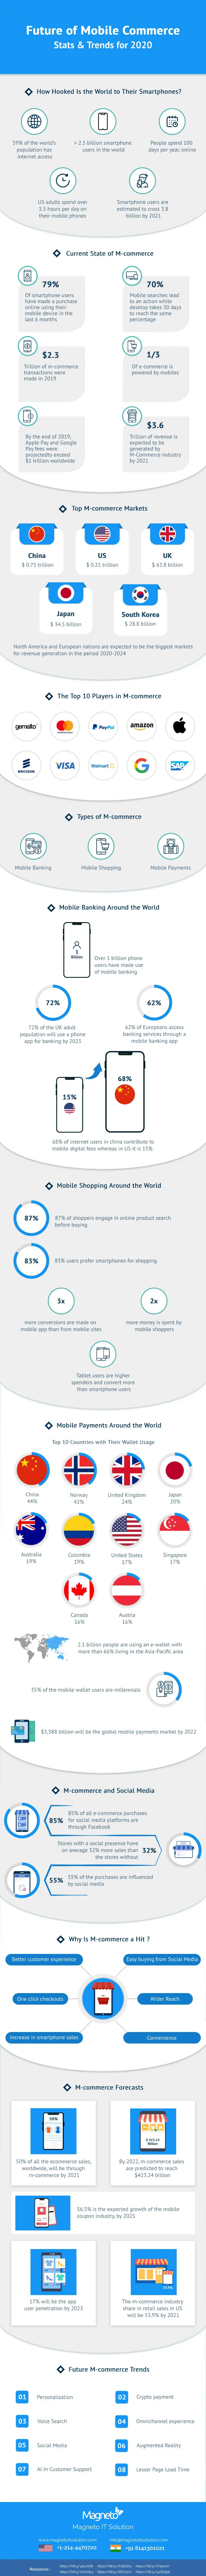 future-of-mobile-commerce_-stats-trends-for-2020-infographic-1.jpg